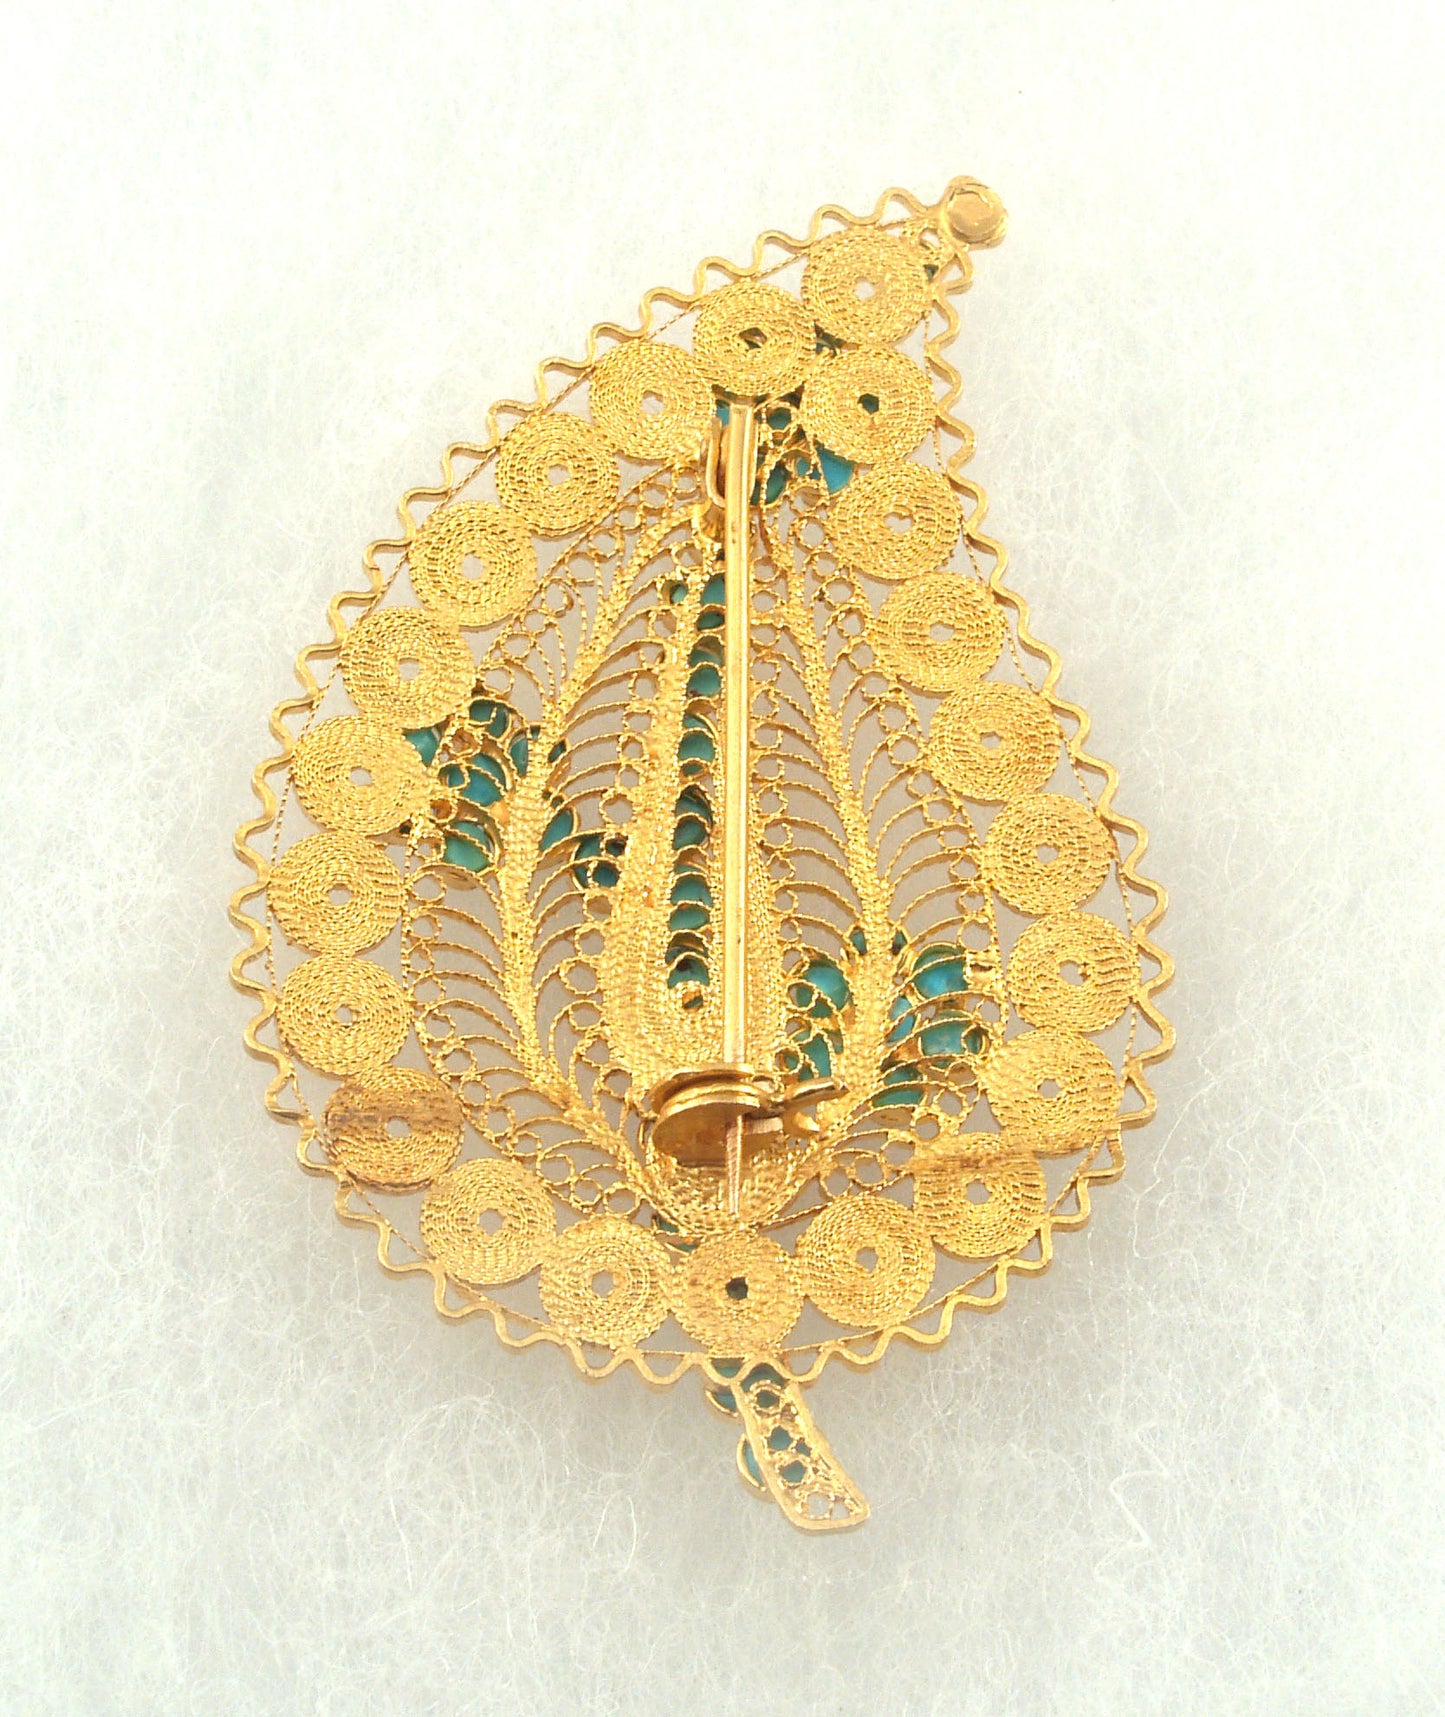 HE-'Shah' Persian solid high karat gold filigree and turquoise pin